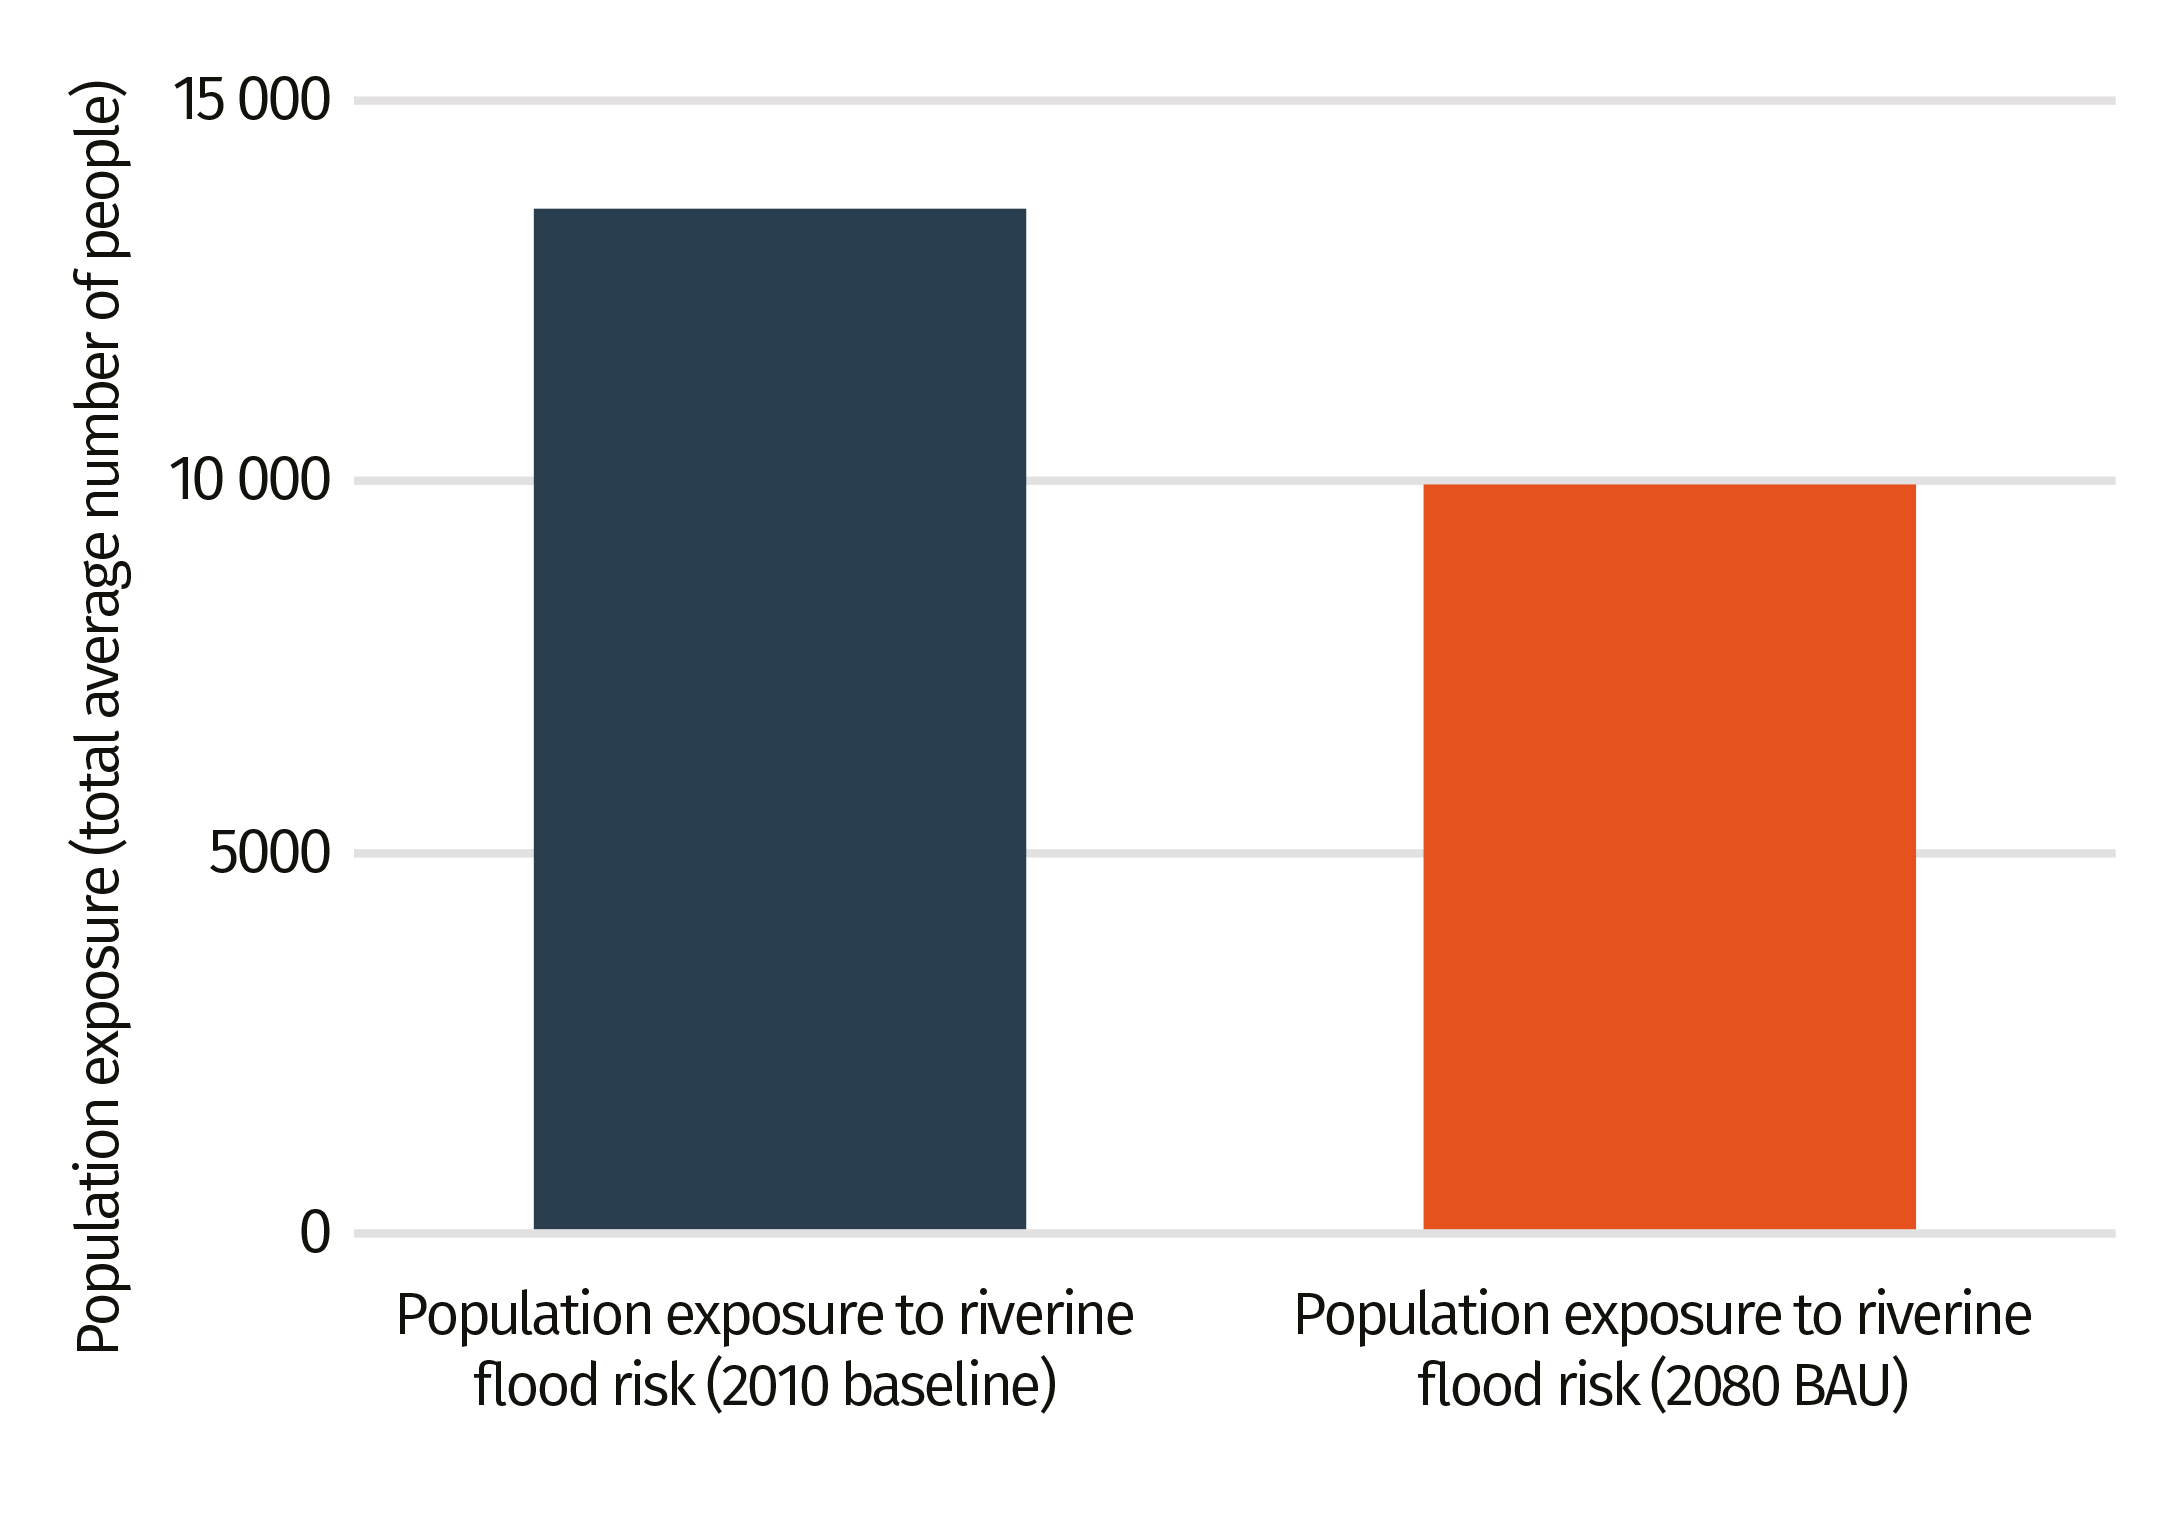 Change in population exposure to riverine flooding in Bulgaria